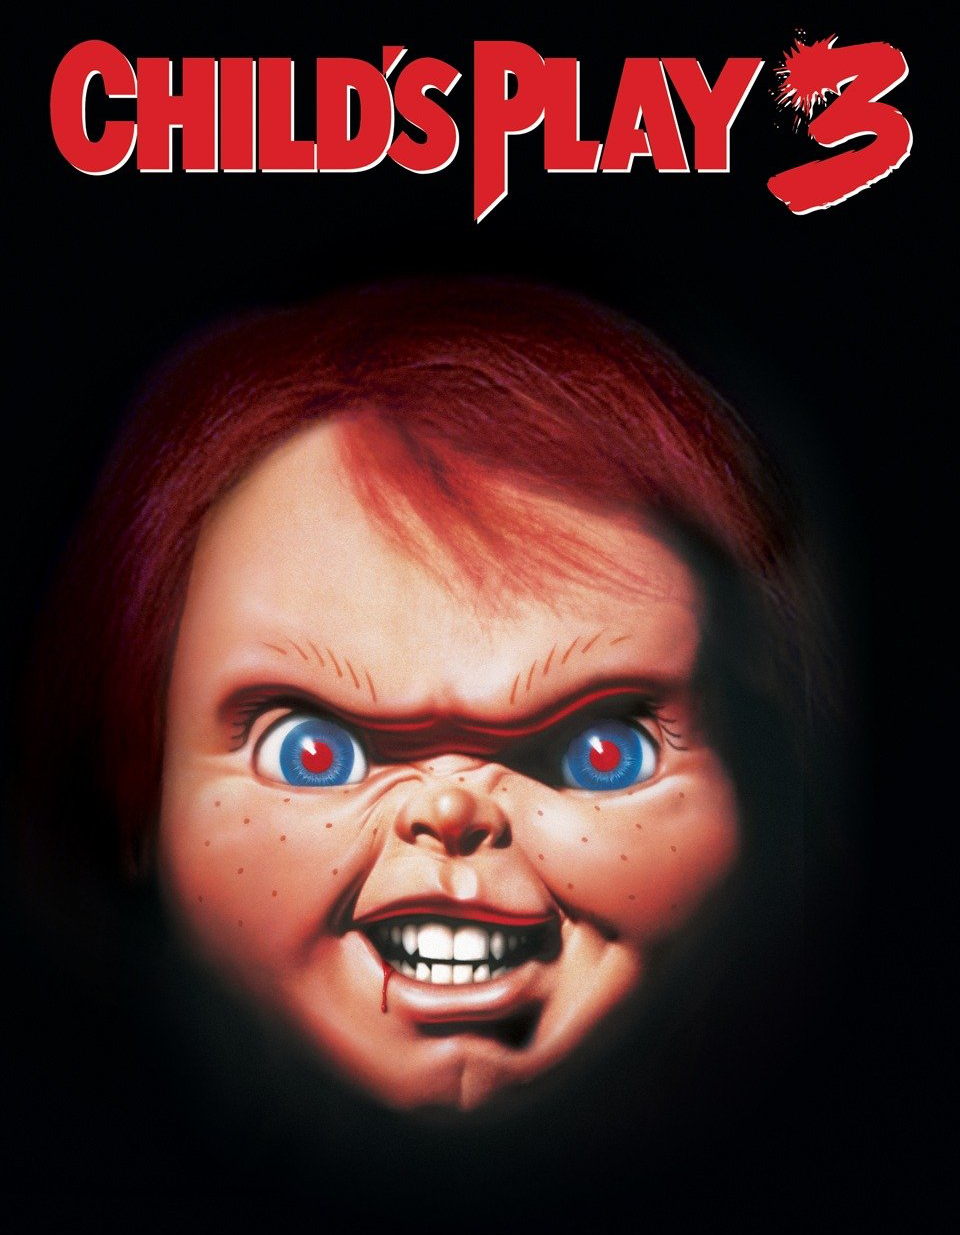 Look who's stalking! - Child's Play 3 (1991)